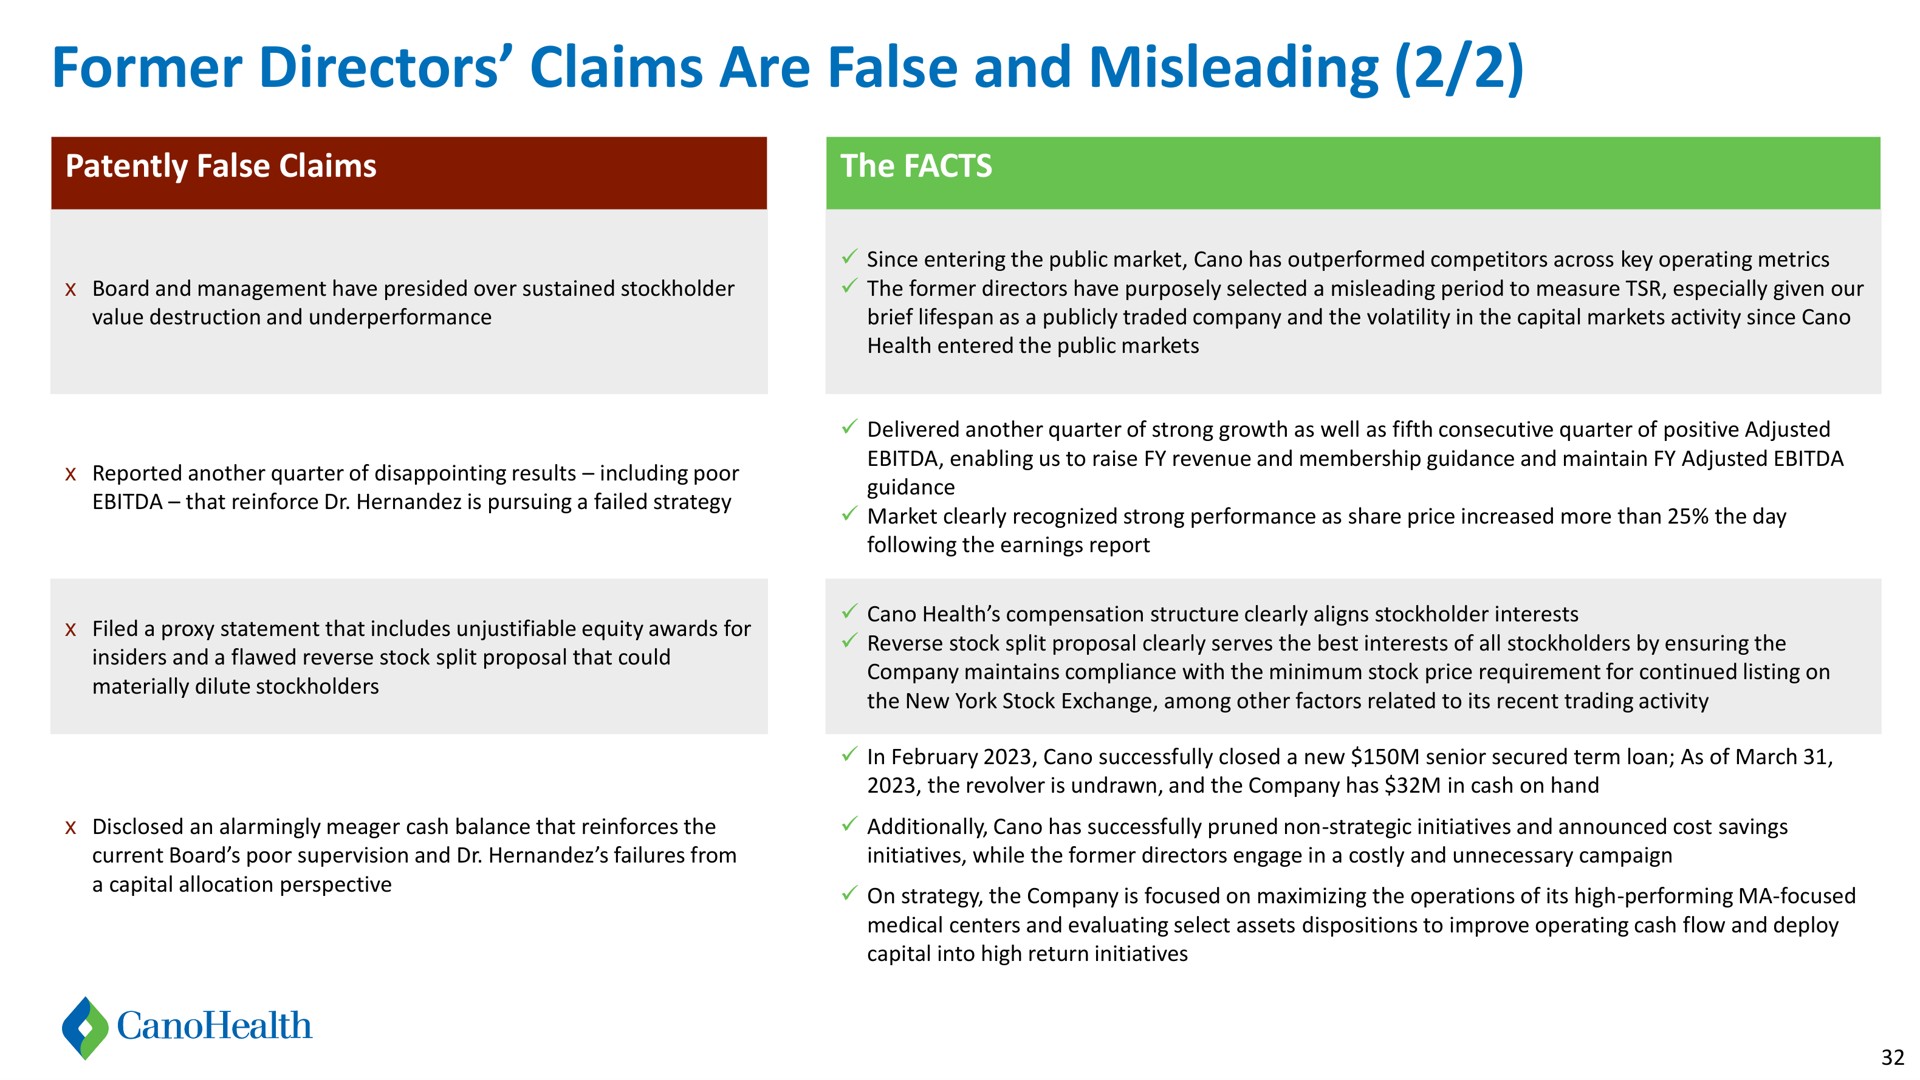 former directors claims are false and misleading | Cano Health